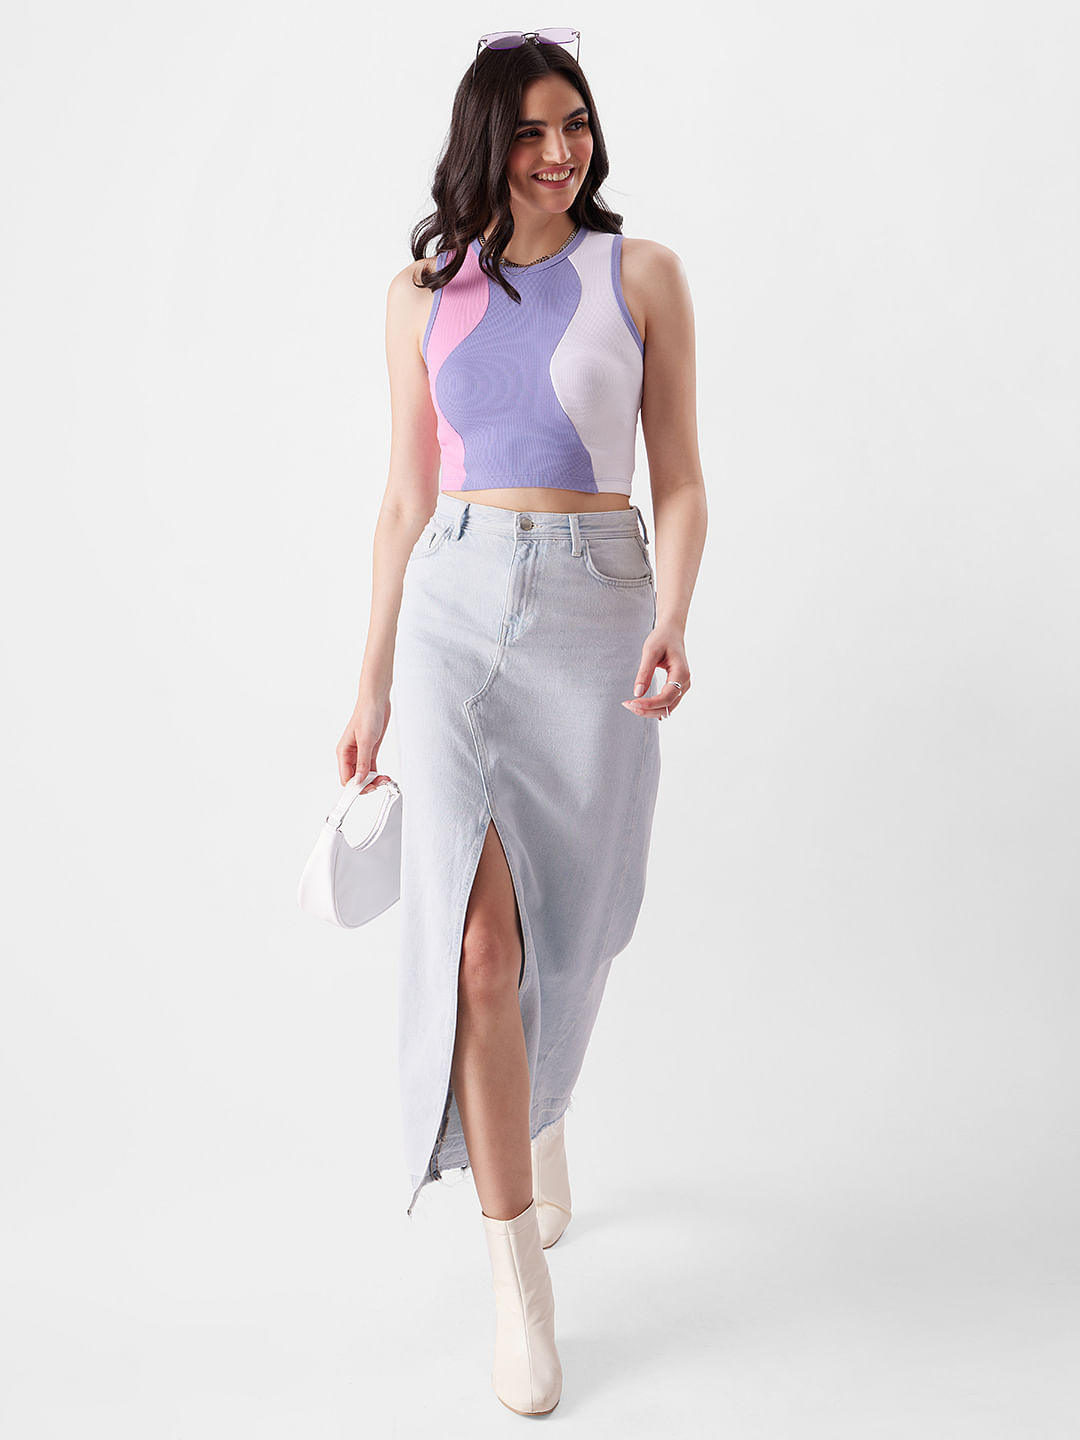 Buy Solids: White, Lavender, Lilac (Colourblock) Womens Tank Top online ...